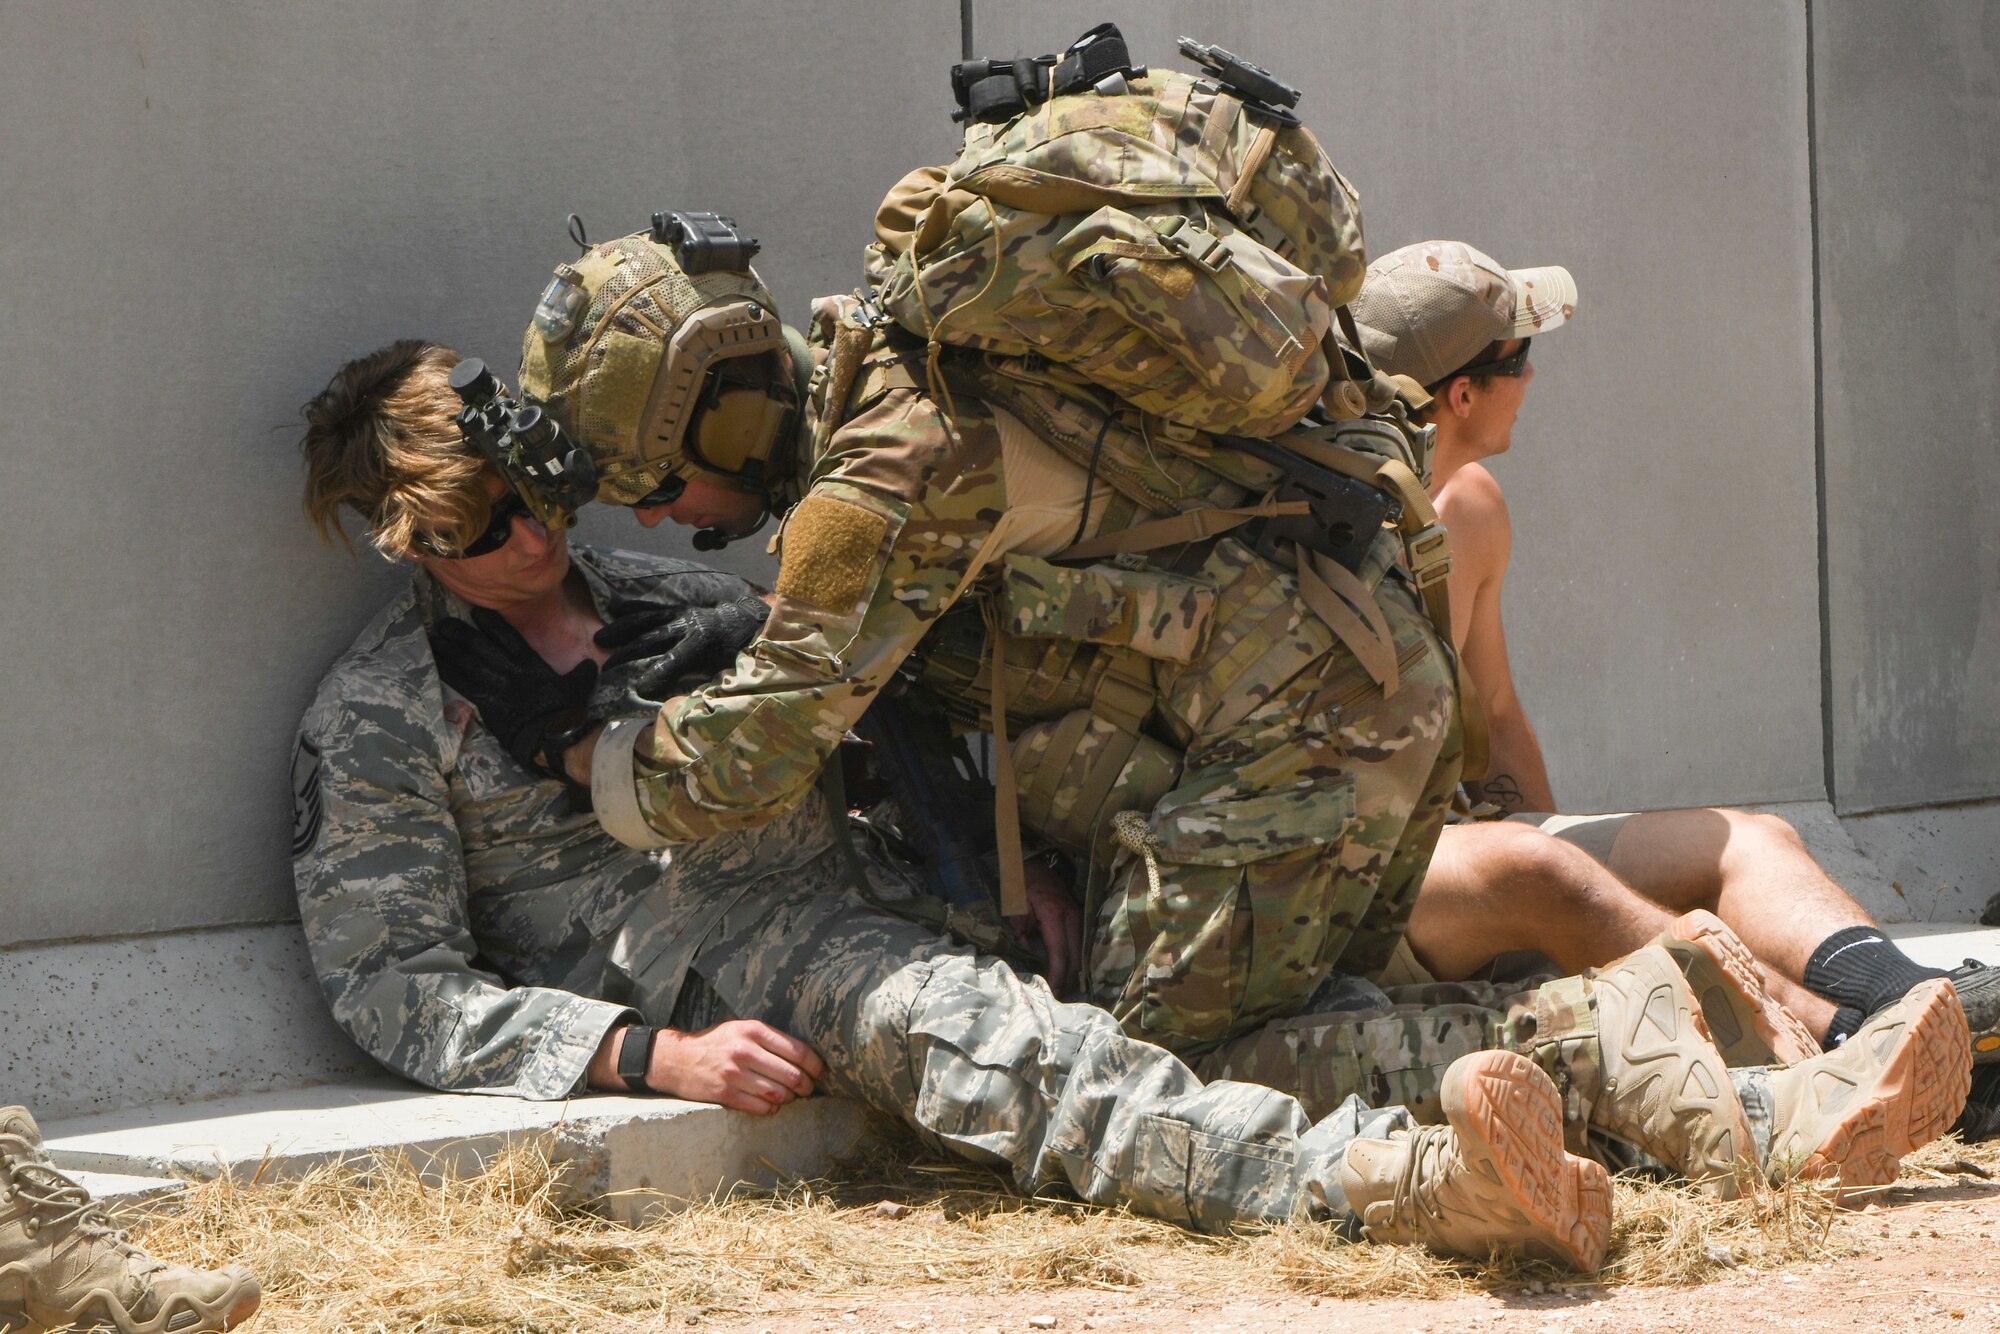 A photo of Airmen performing medical training